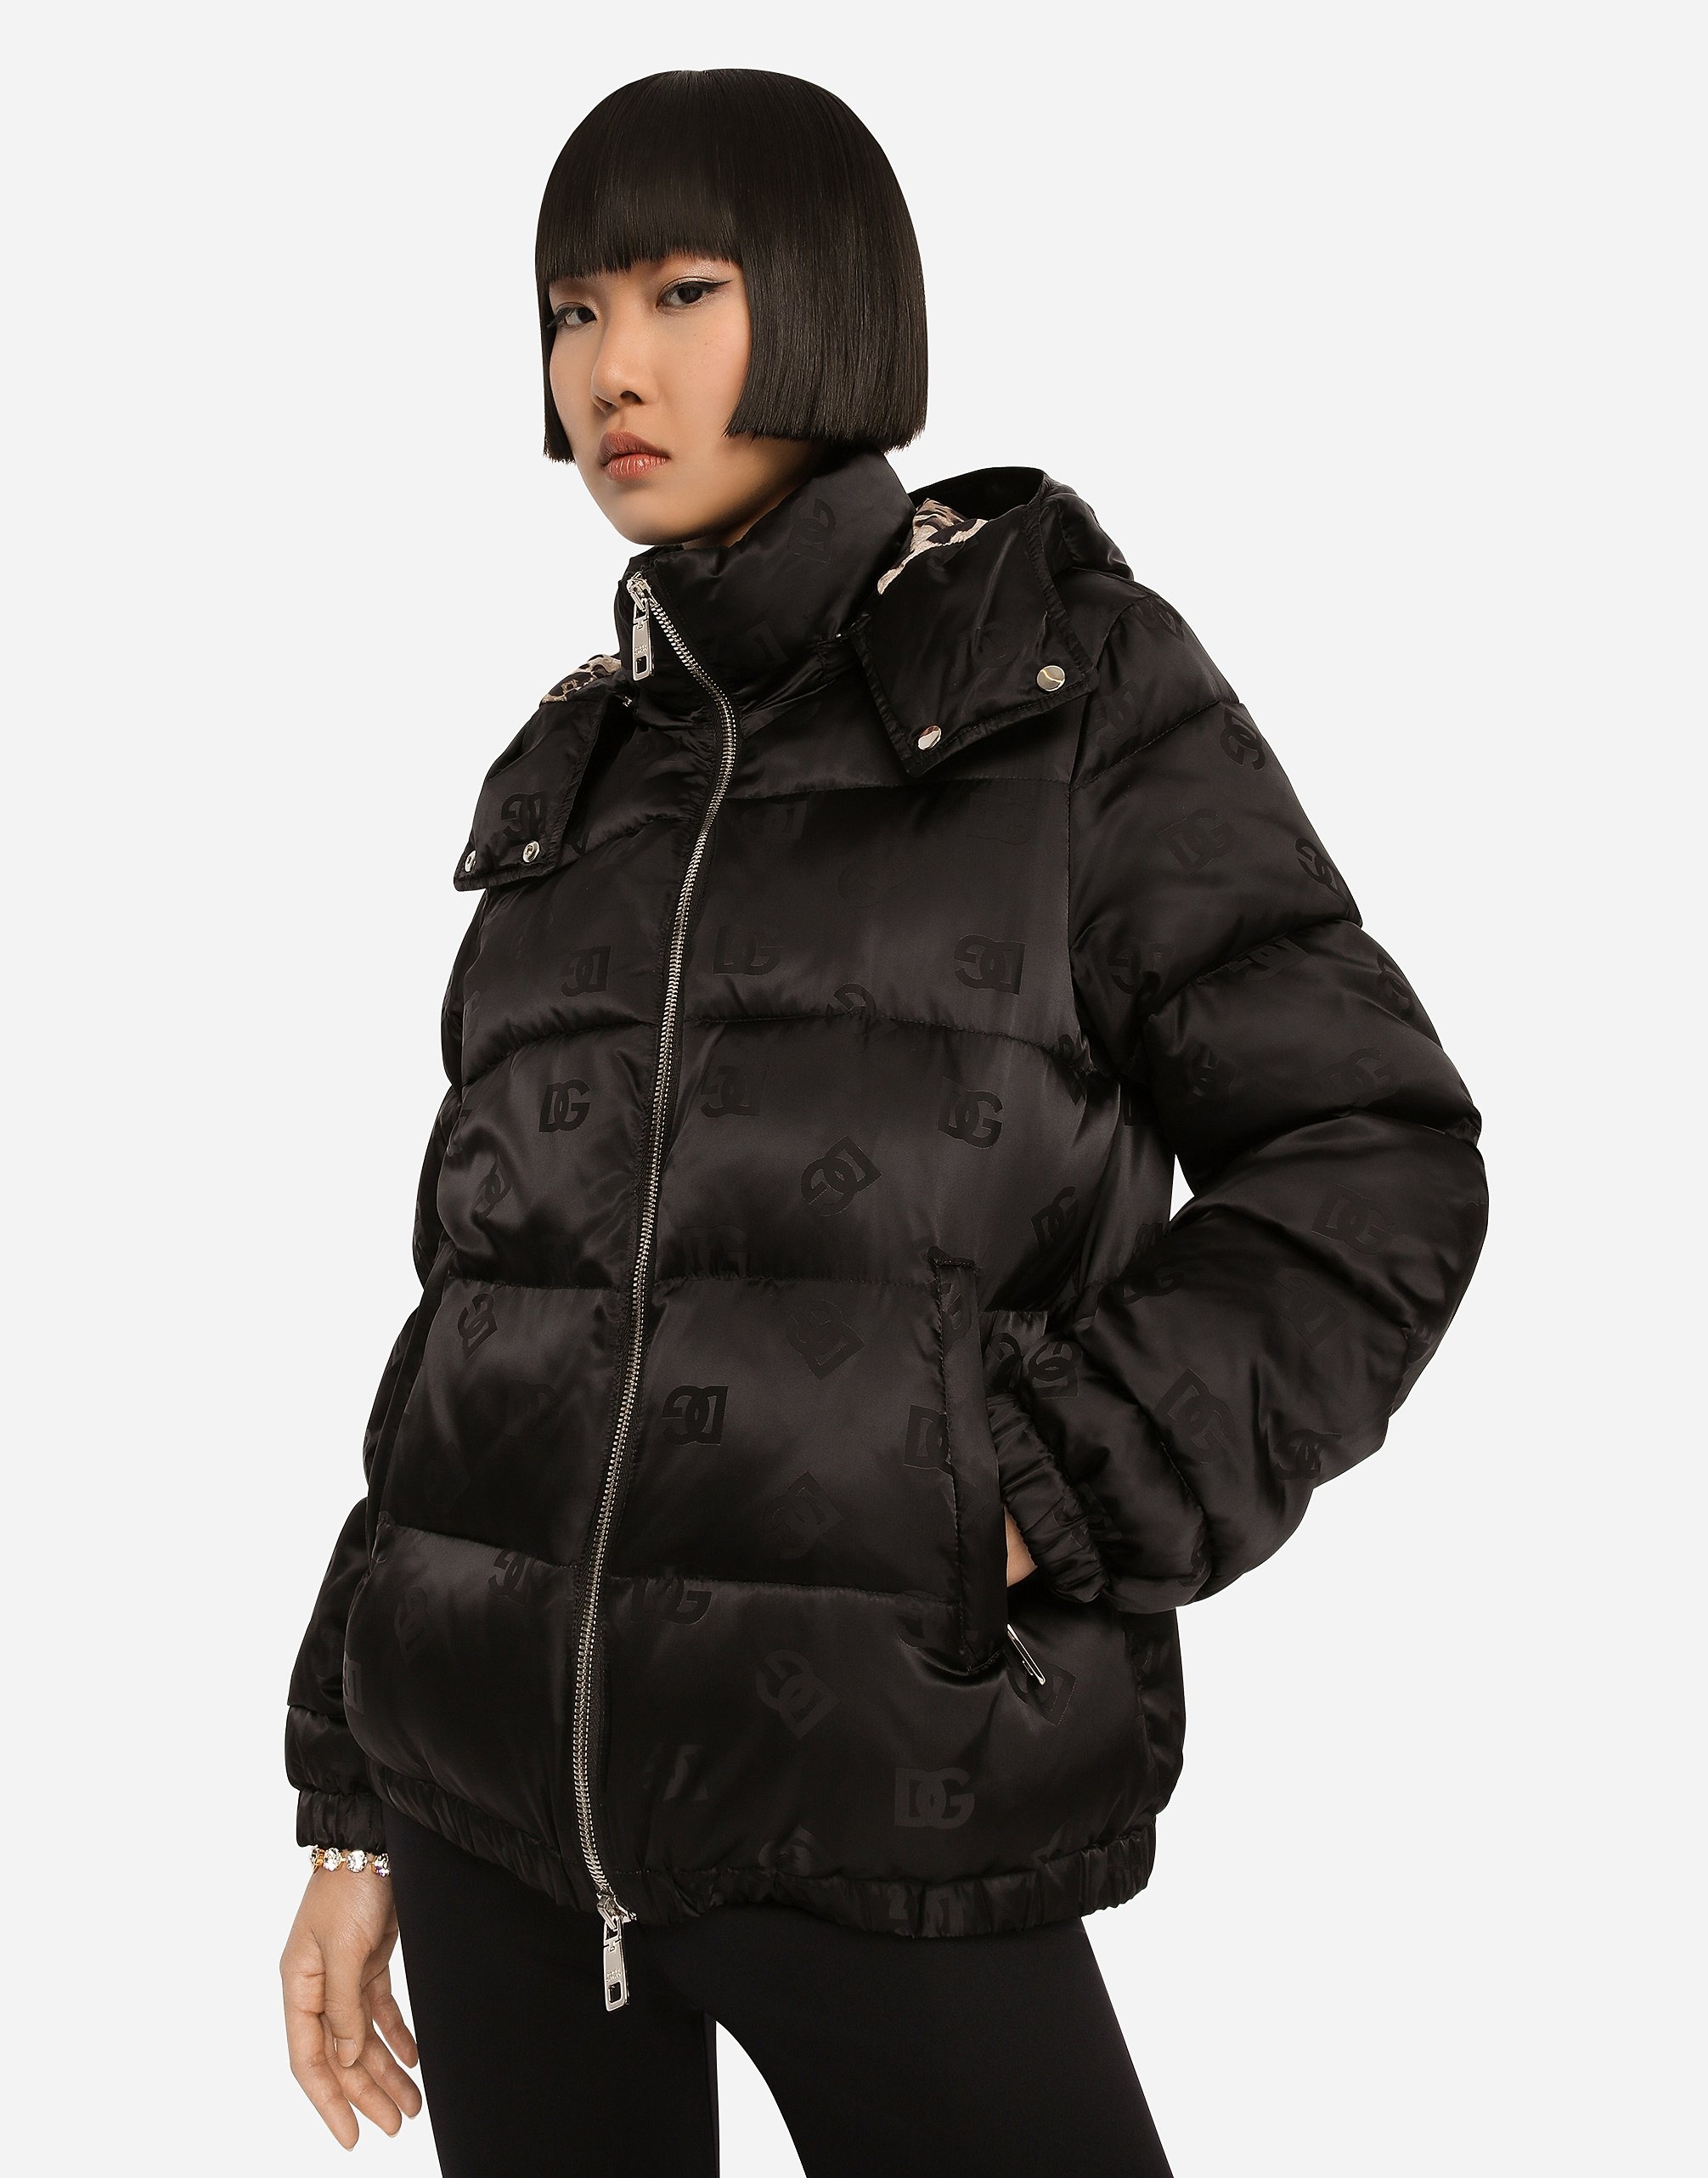 Satin jacquard down jacket with all-over DG logo - 2